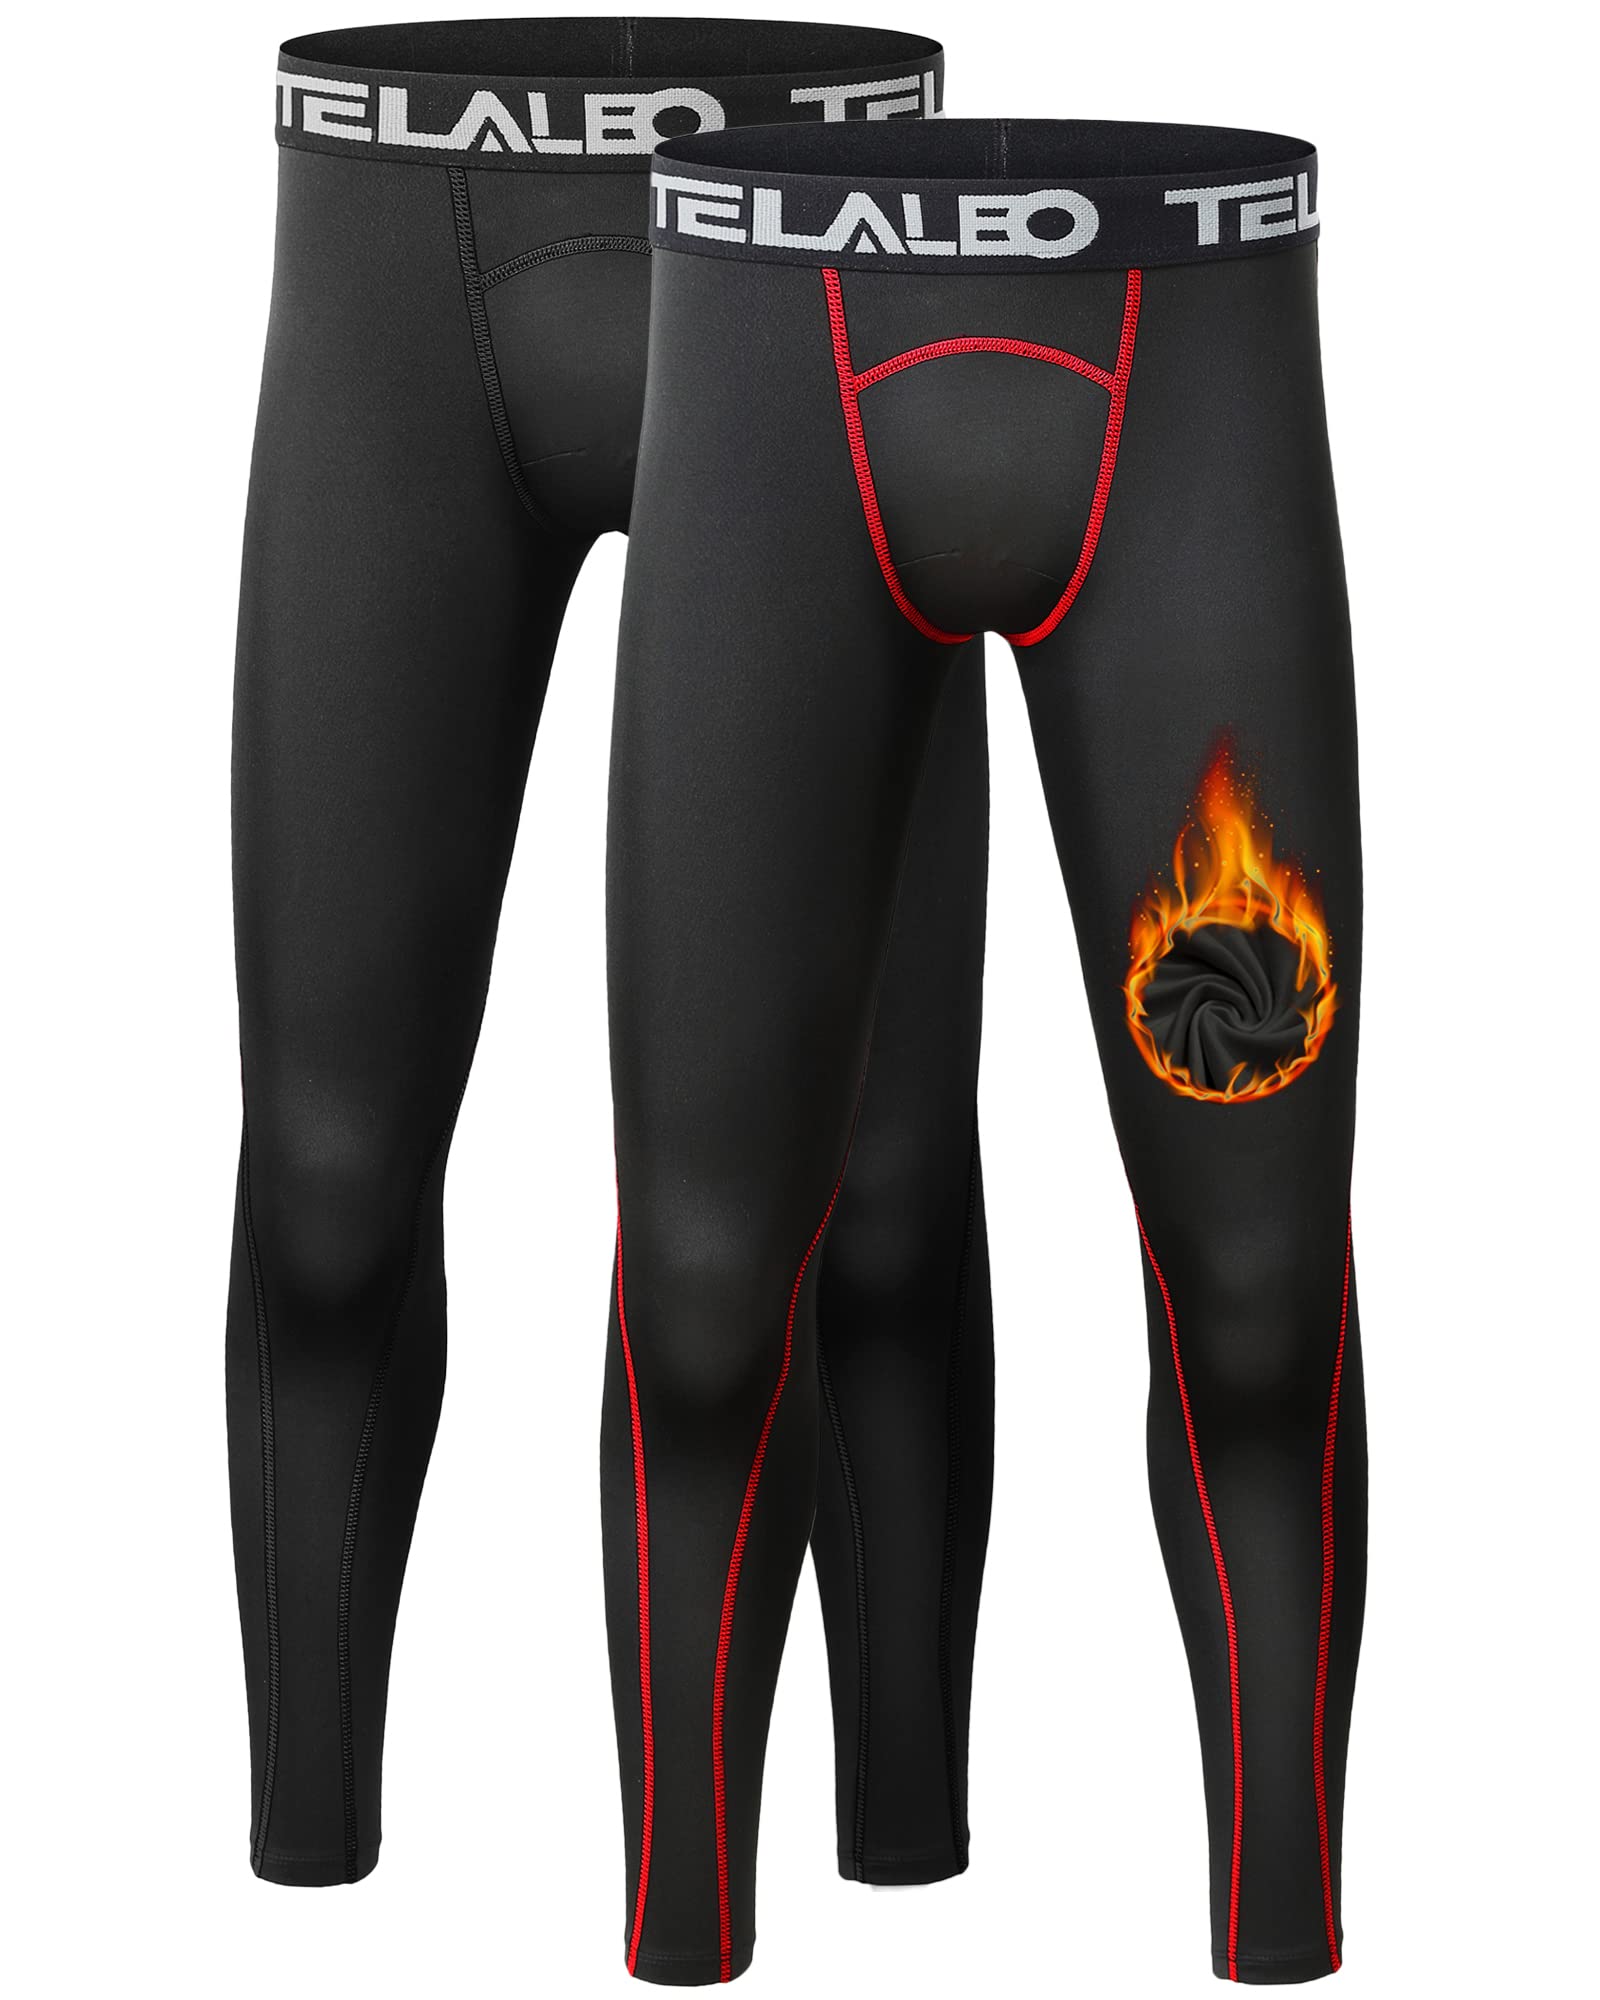 TELALEO Boys Thermal Compression Leggings Pants Youth Fleece Lined